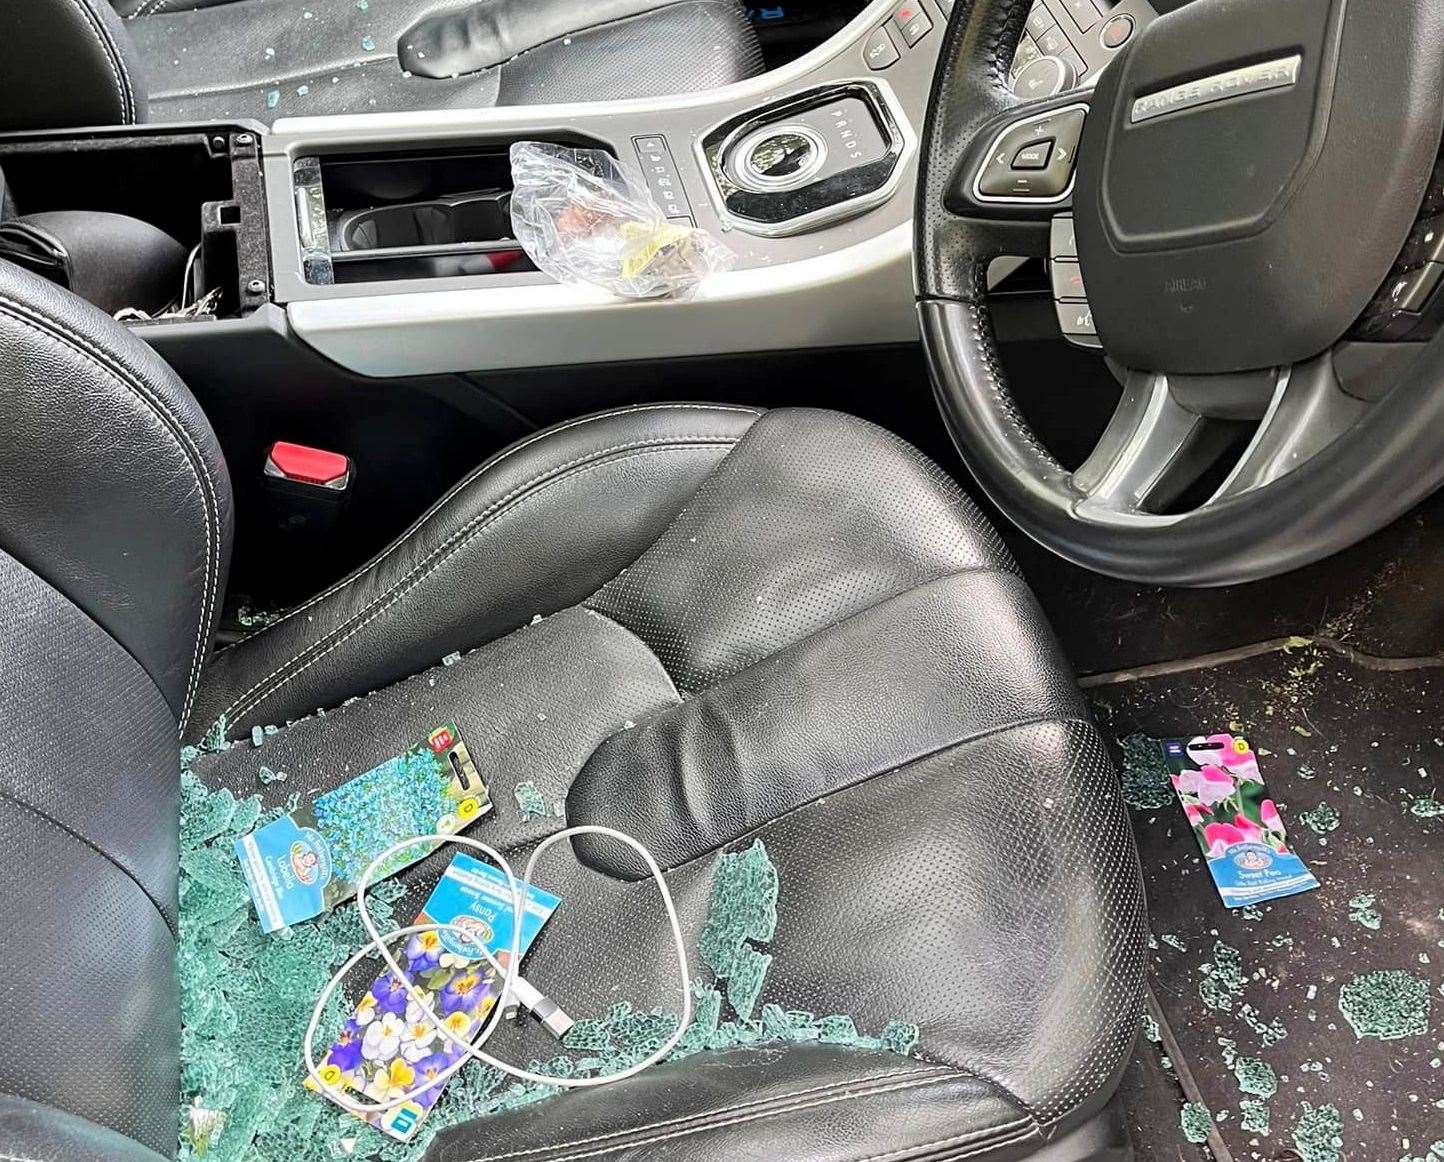 The car window was smashed, leaving glass covering the seats